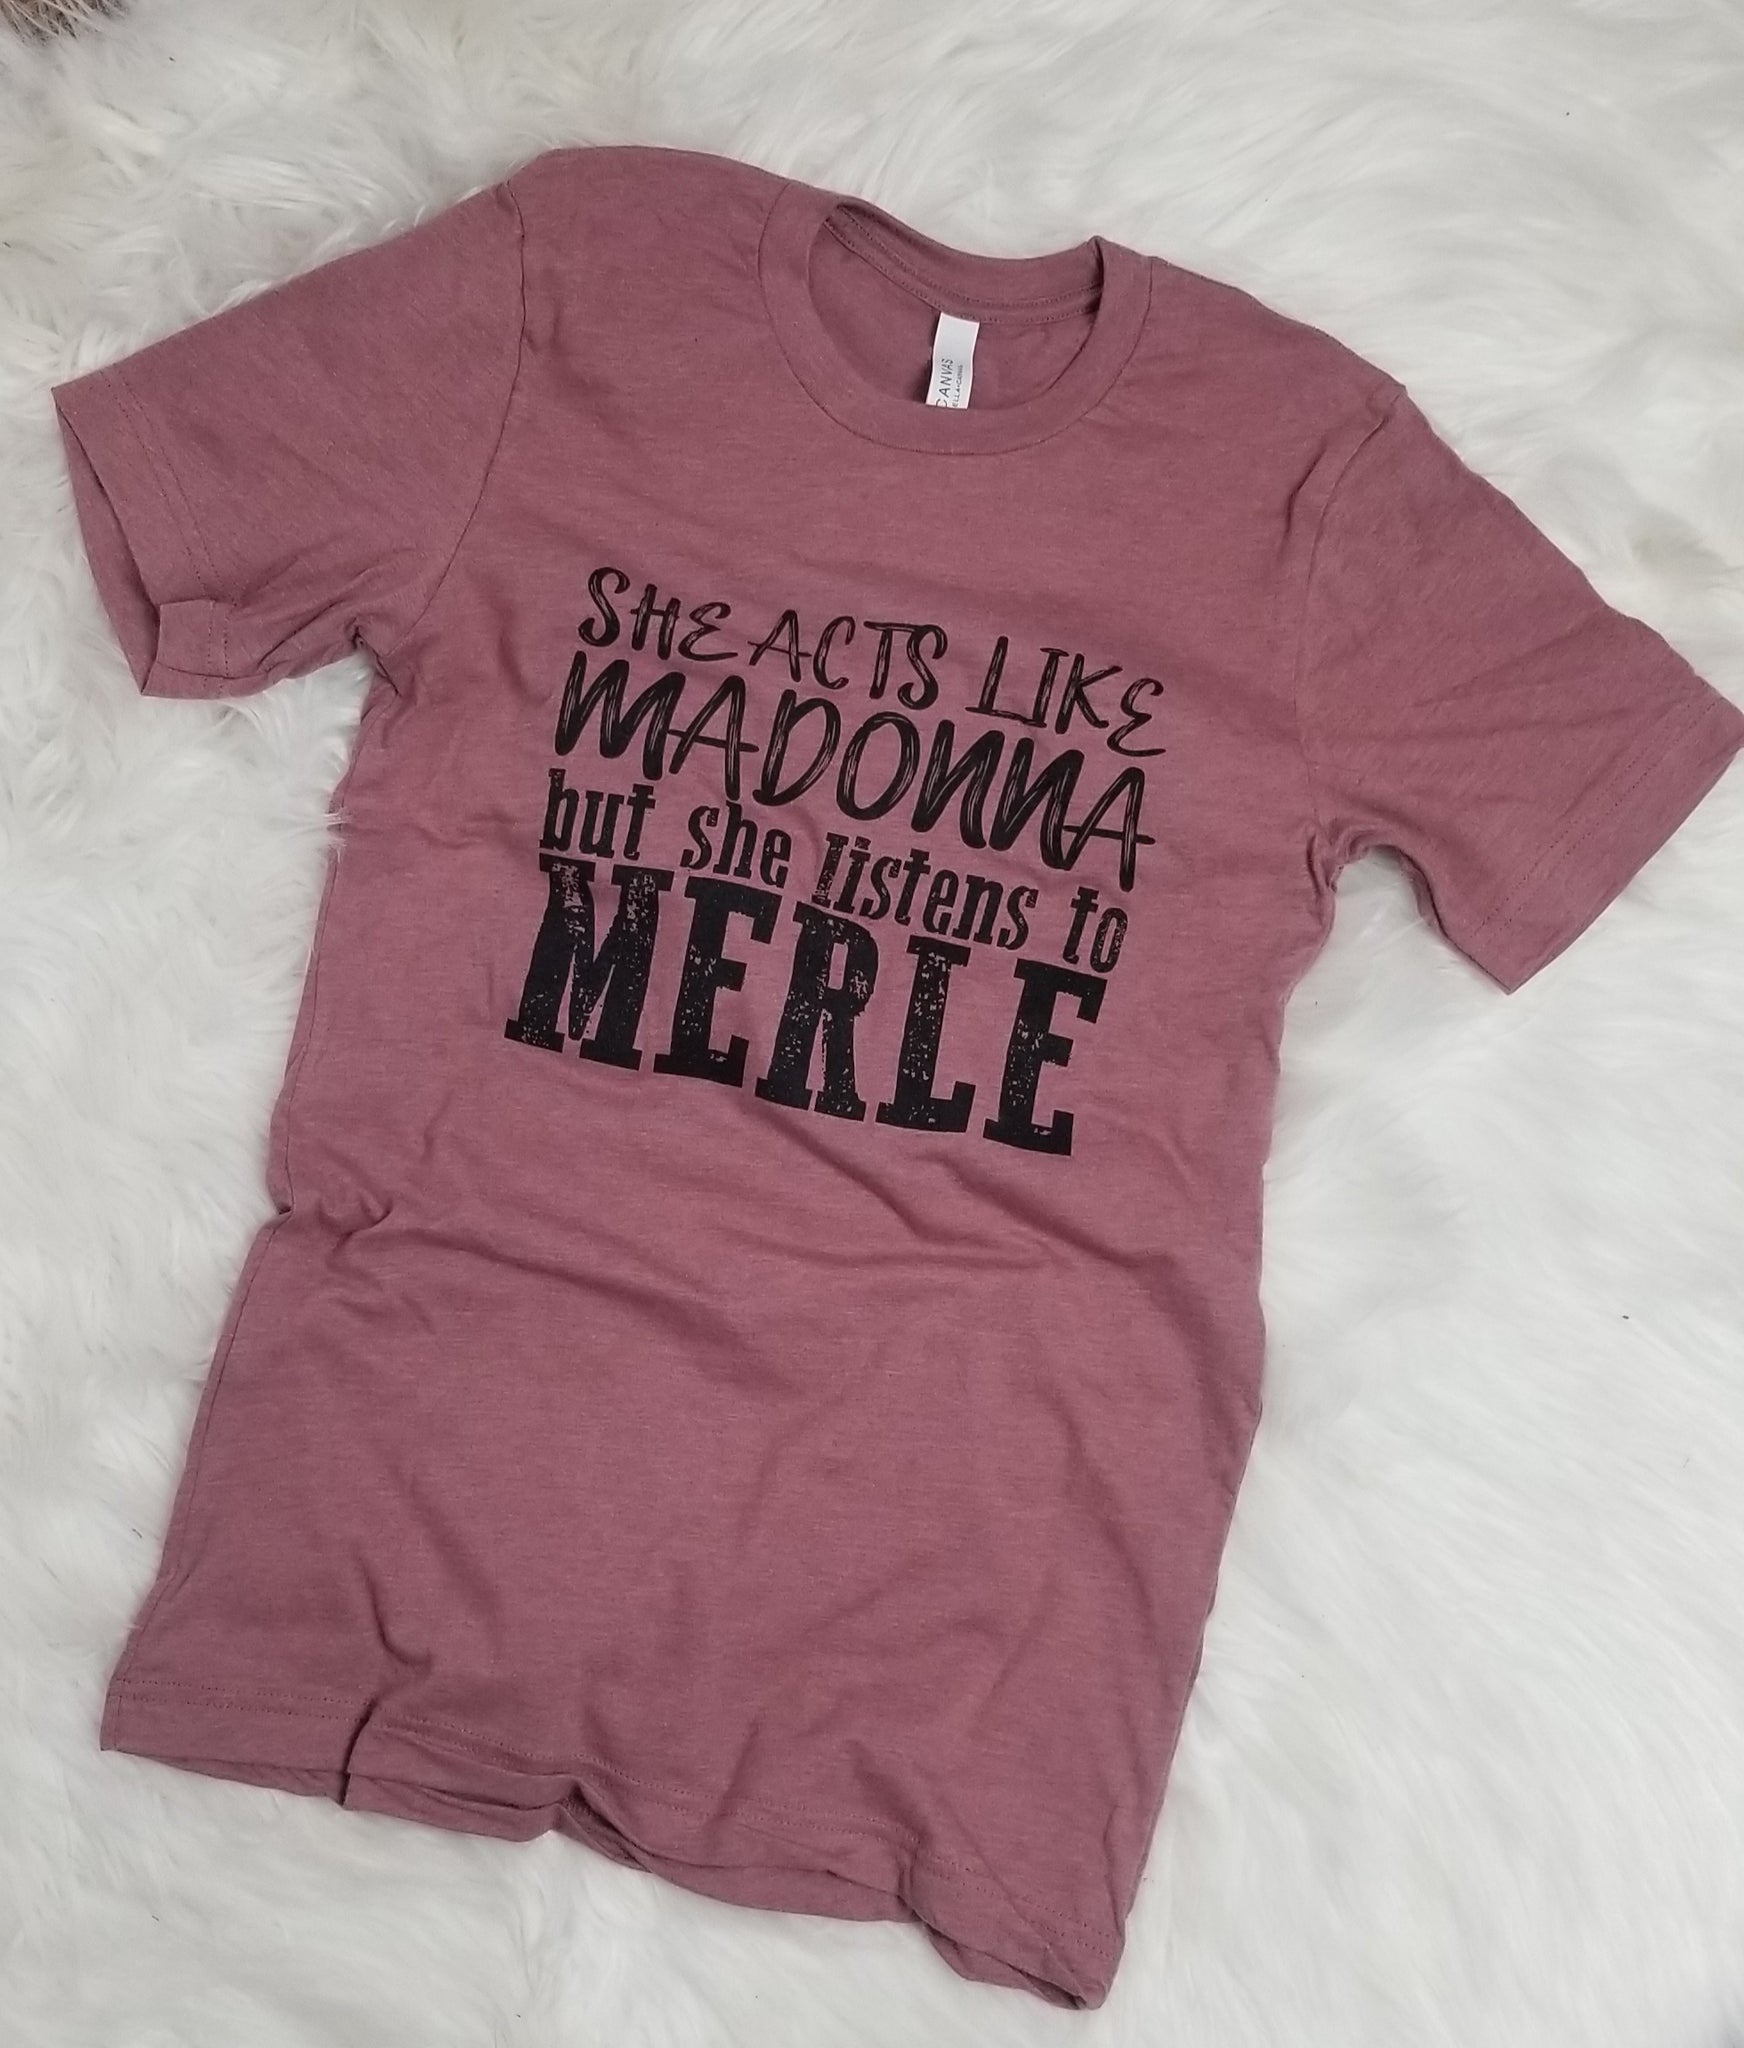 Acts Like Madonna But She Listens To Merle Soft Graphic Tee * FINAL SALE